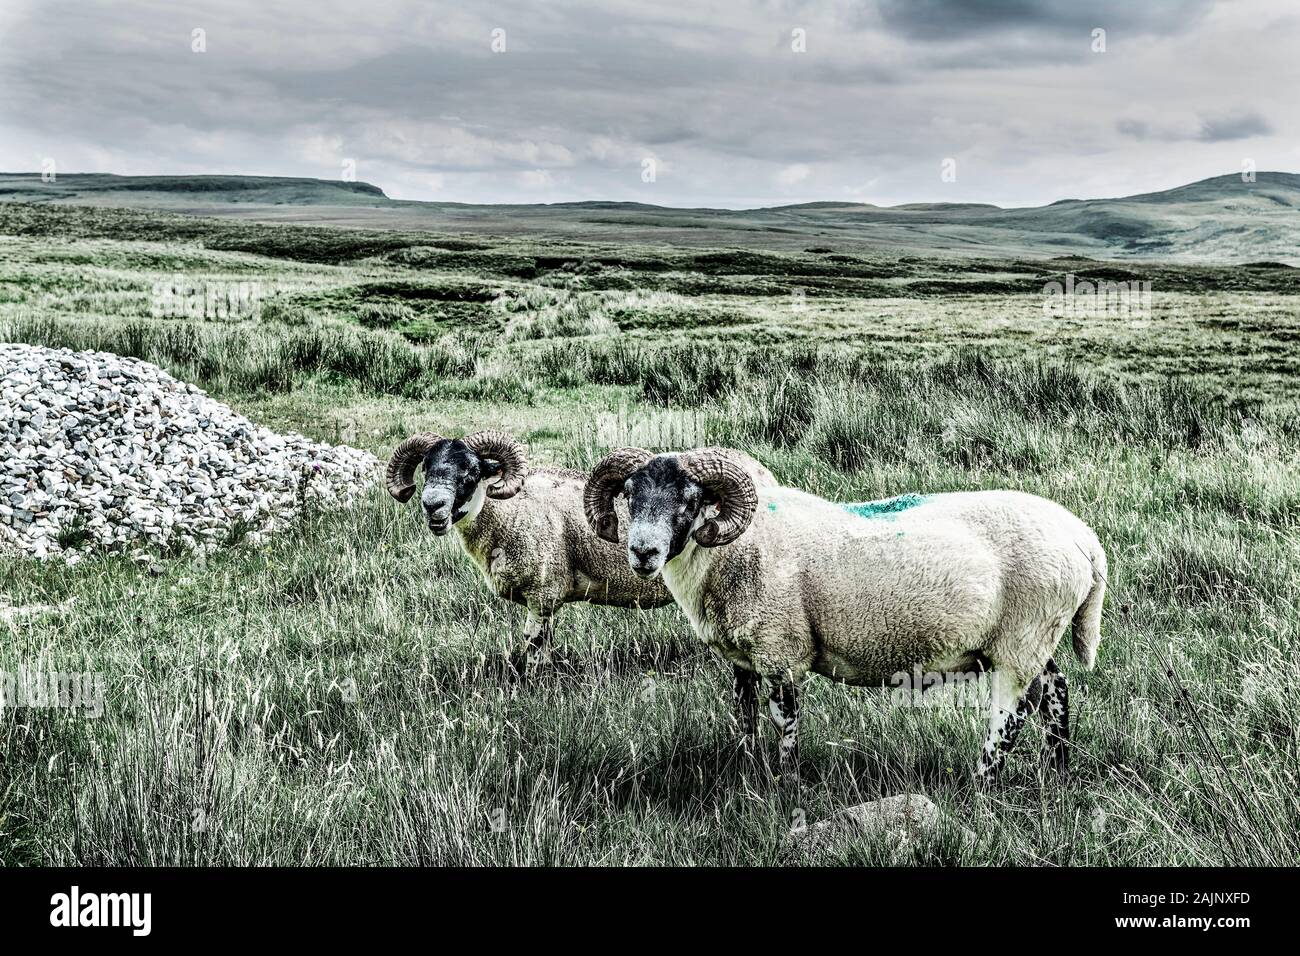 Two sheep in field dramatic style Stock Photo